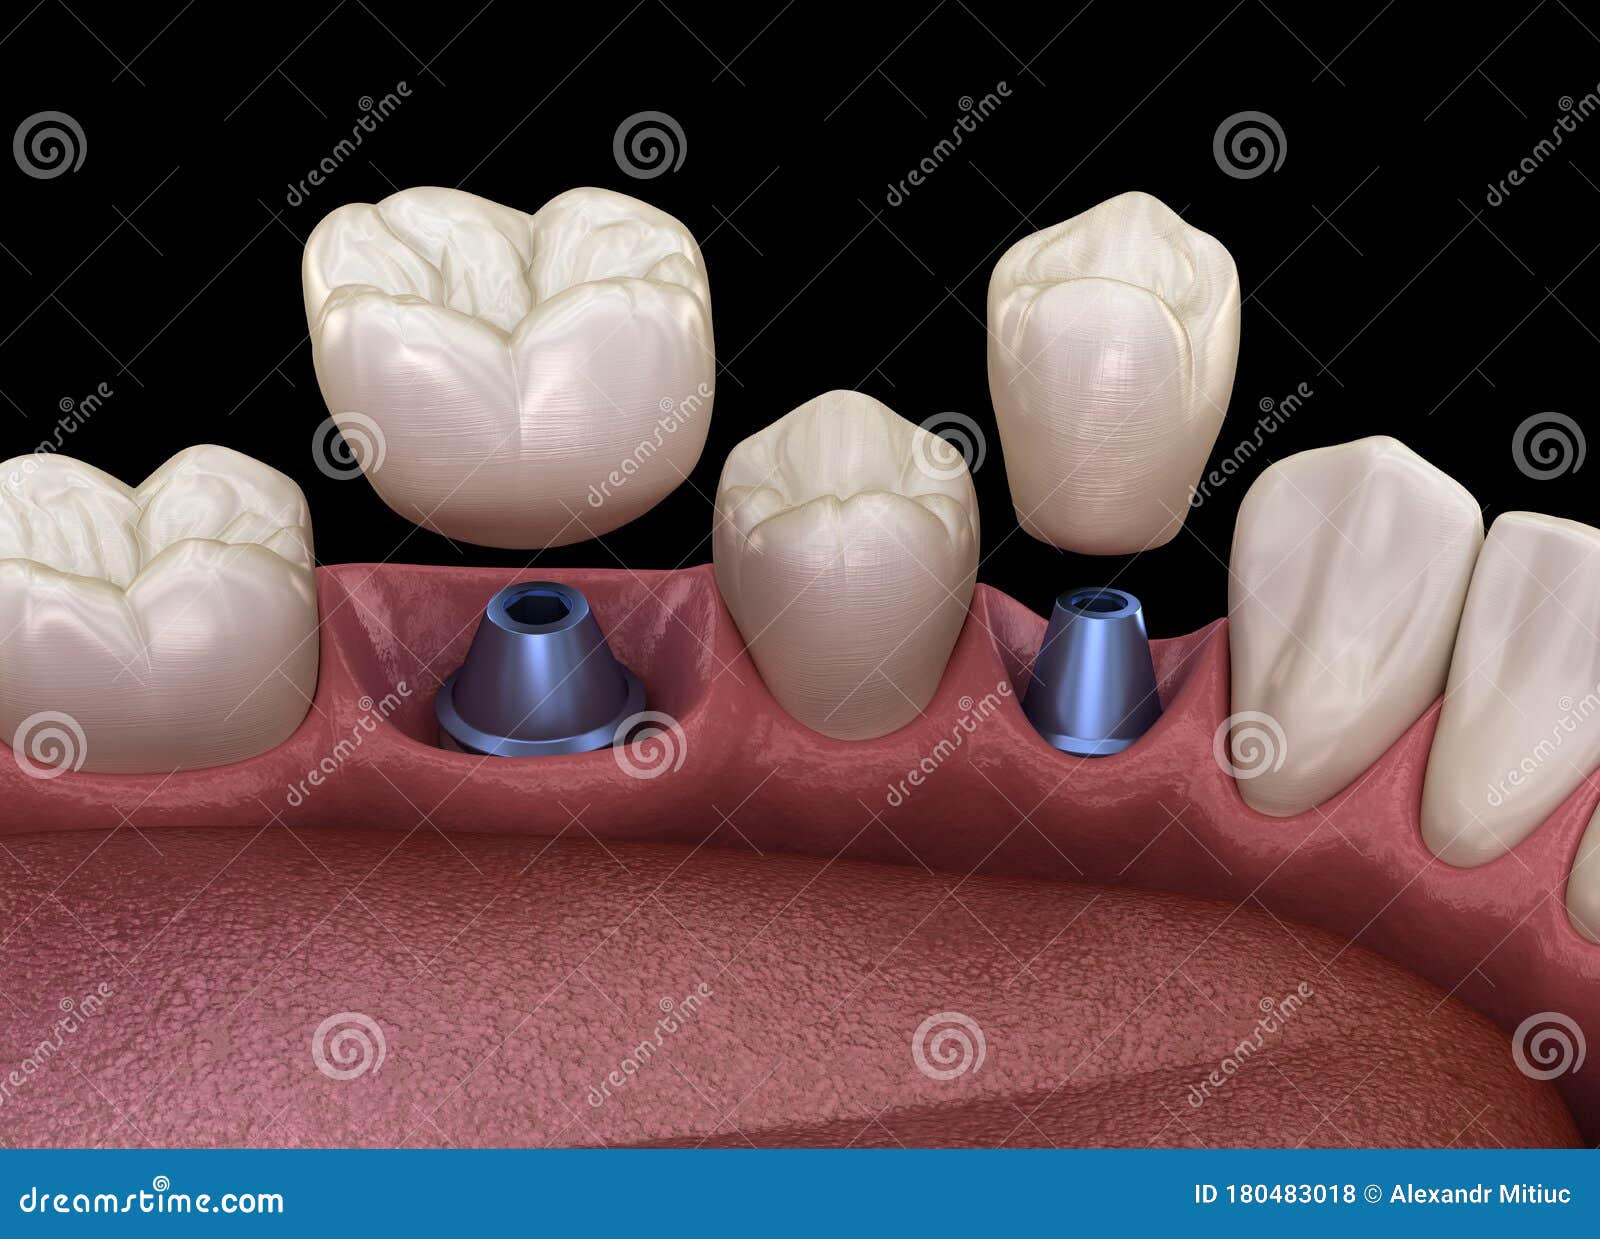 premolar and molar tooth crown installation over implant - concept. 3d  of human teeth